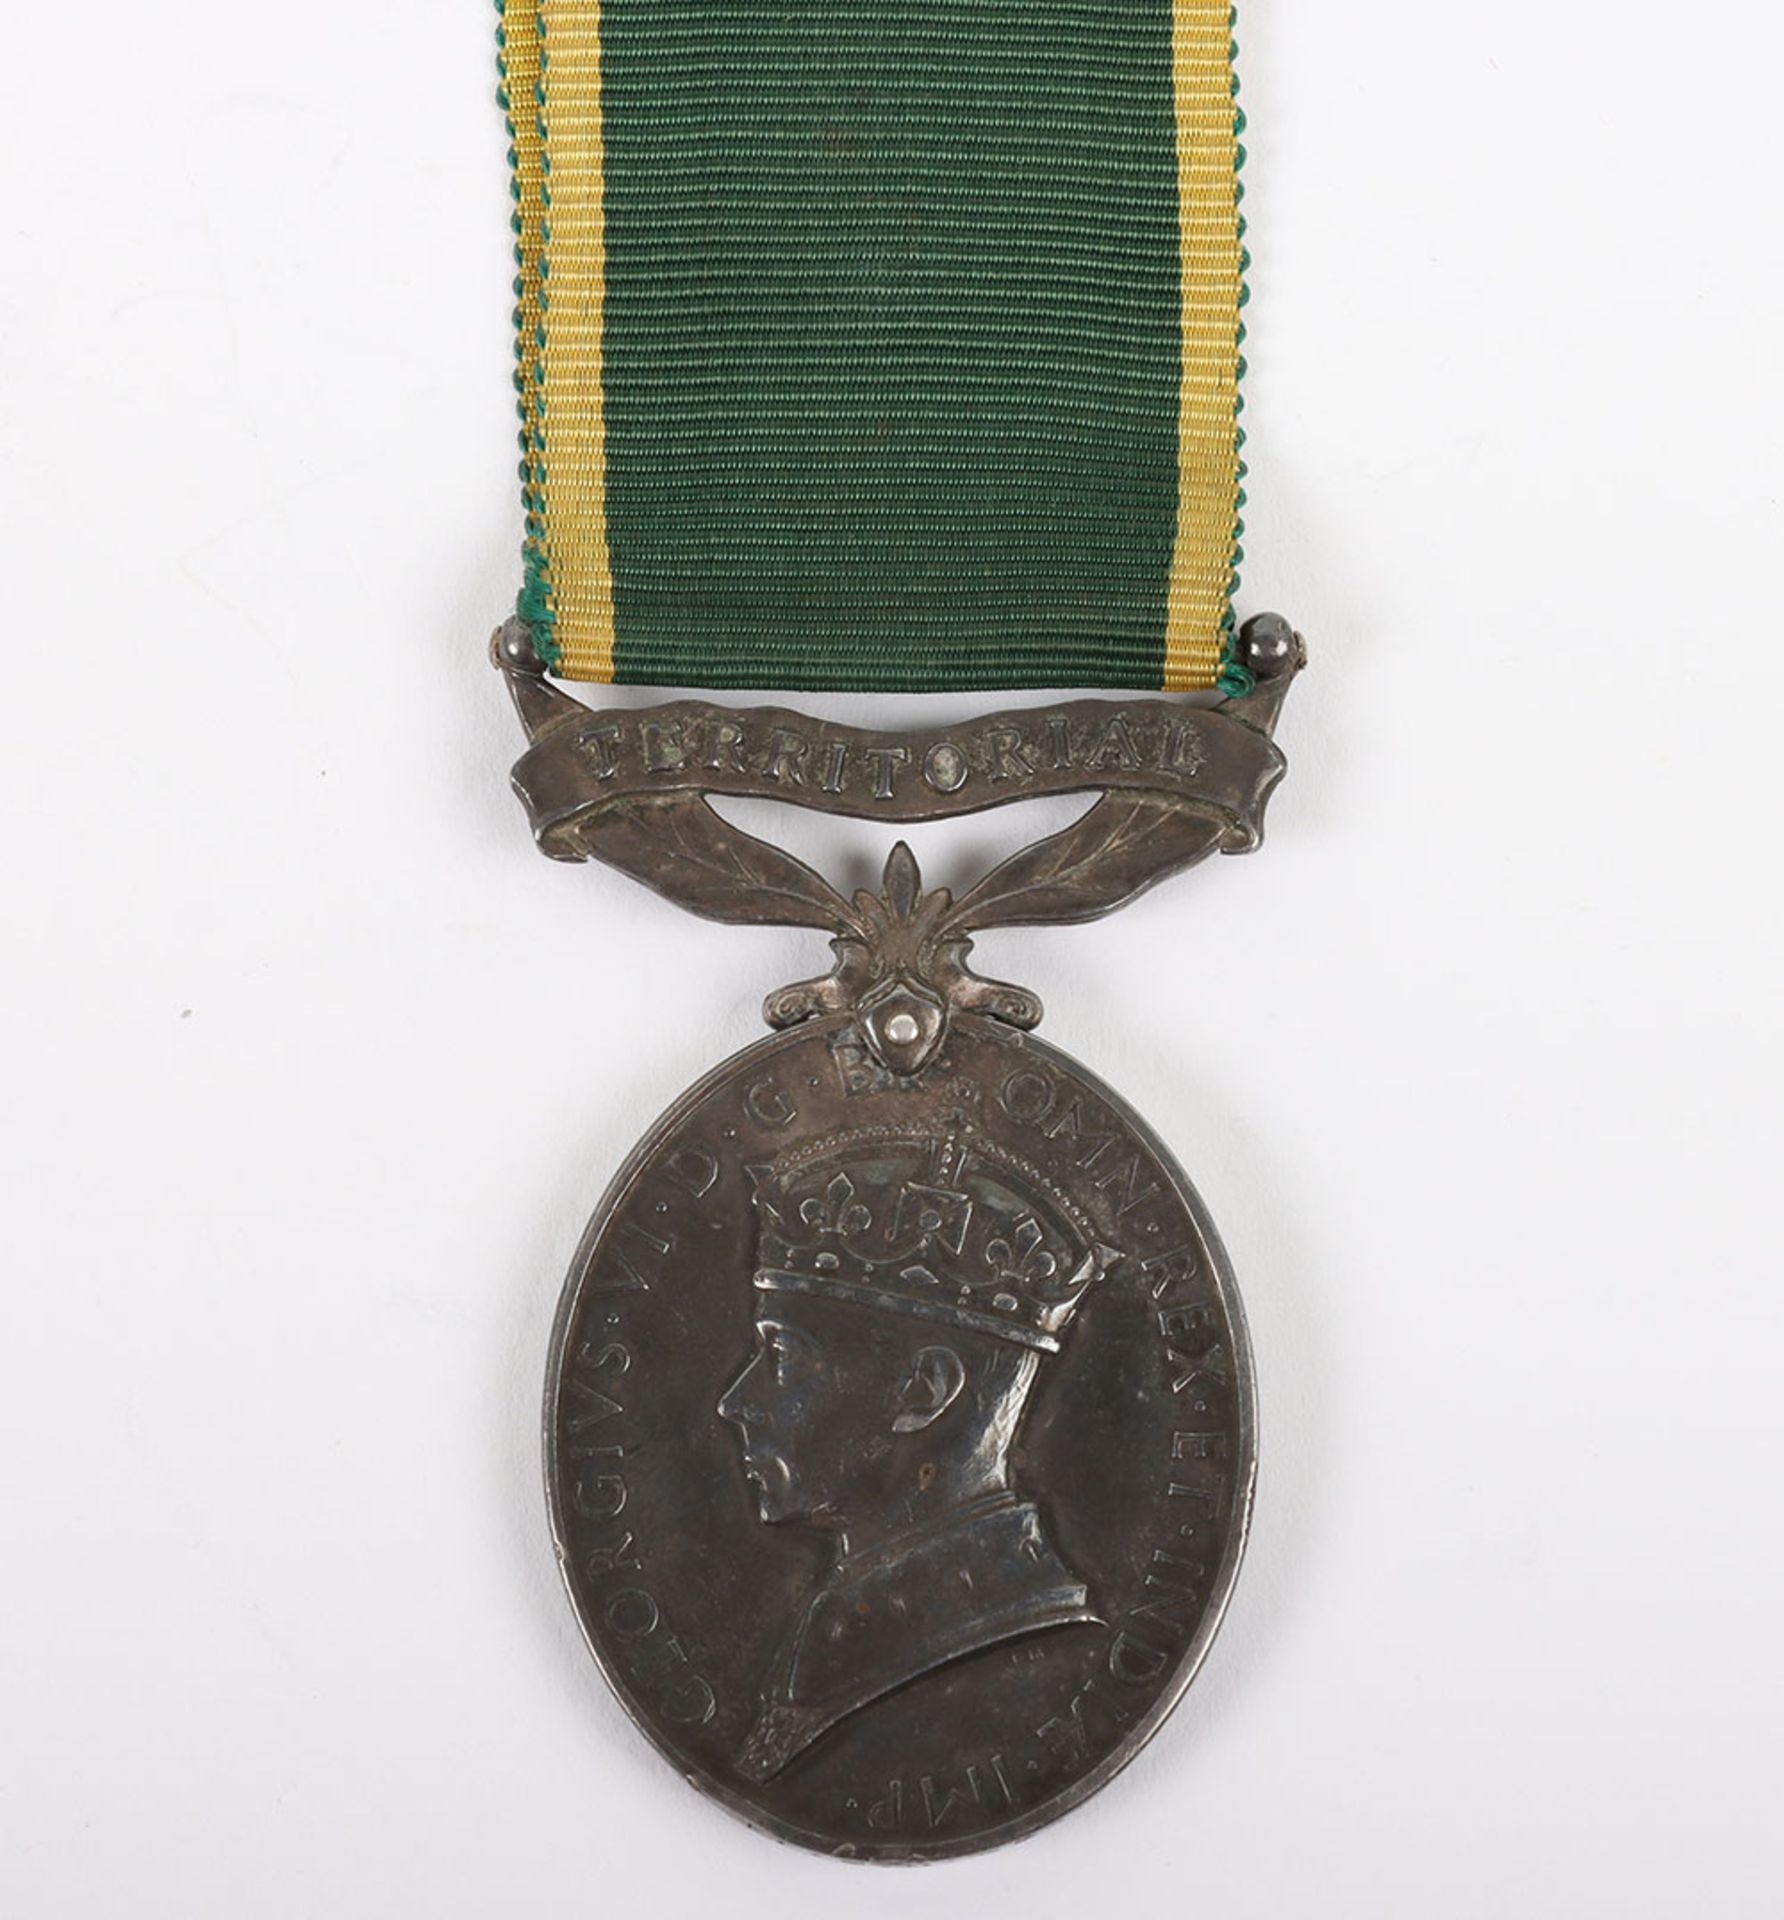 An Efficiency medal to an Officer in the Royal Artillery